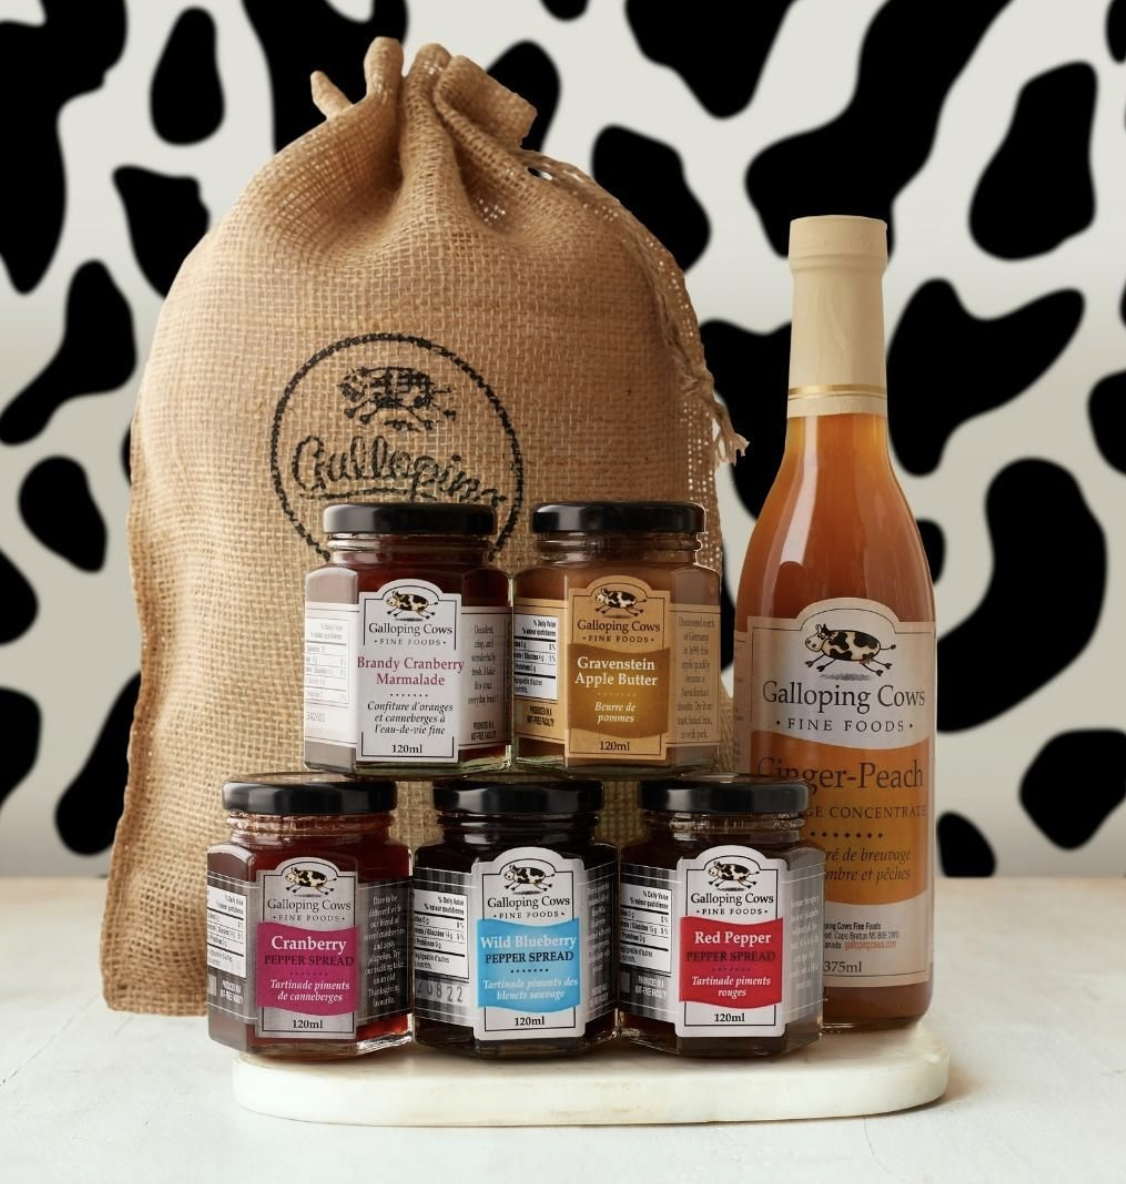 A gift set of different jams and ginger peach bottle, in front of a burlap bag.